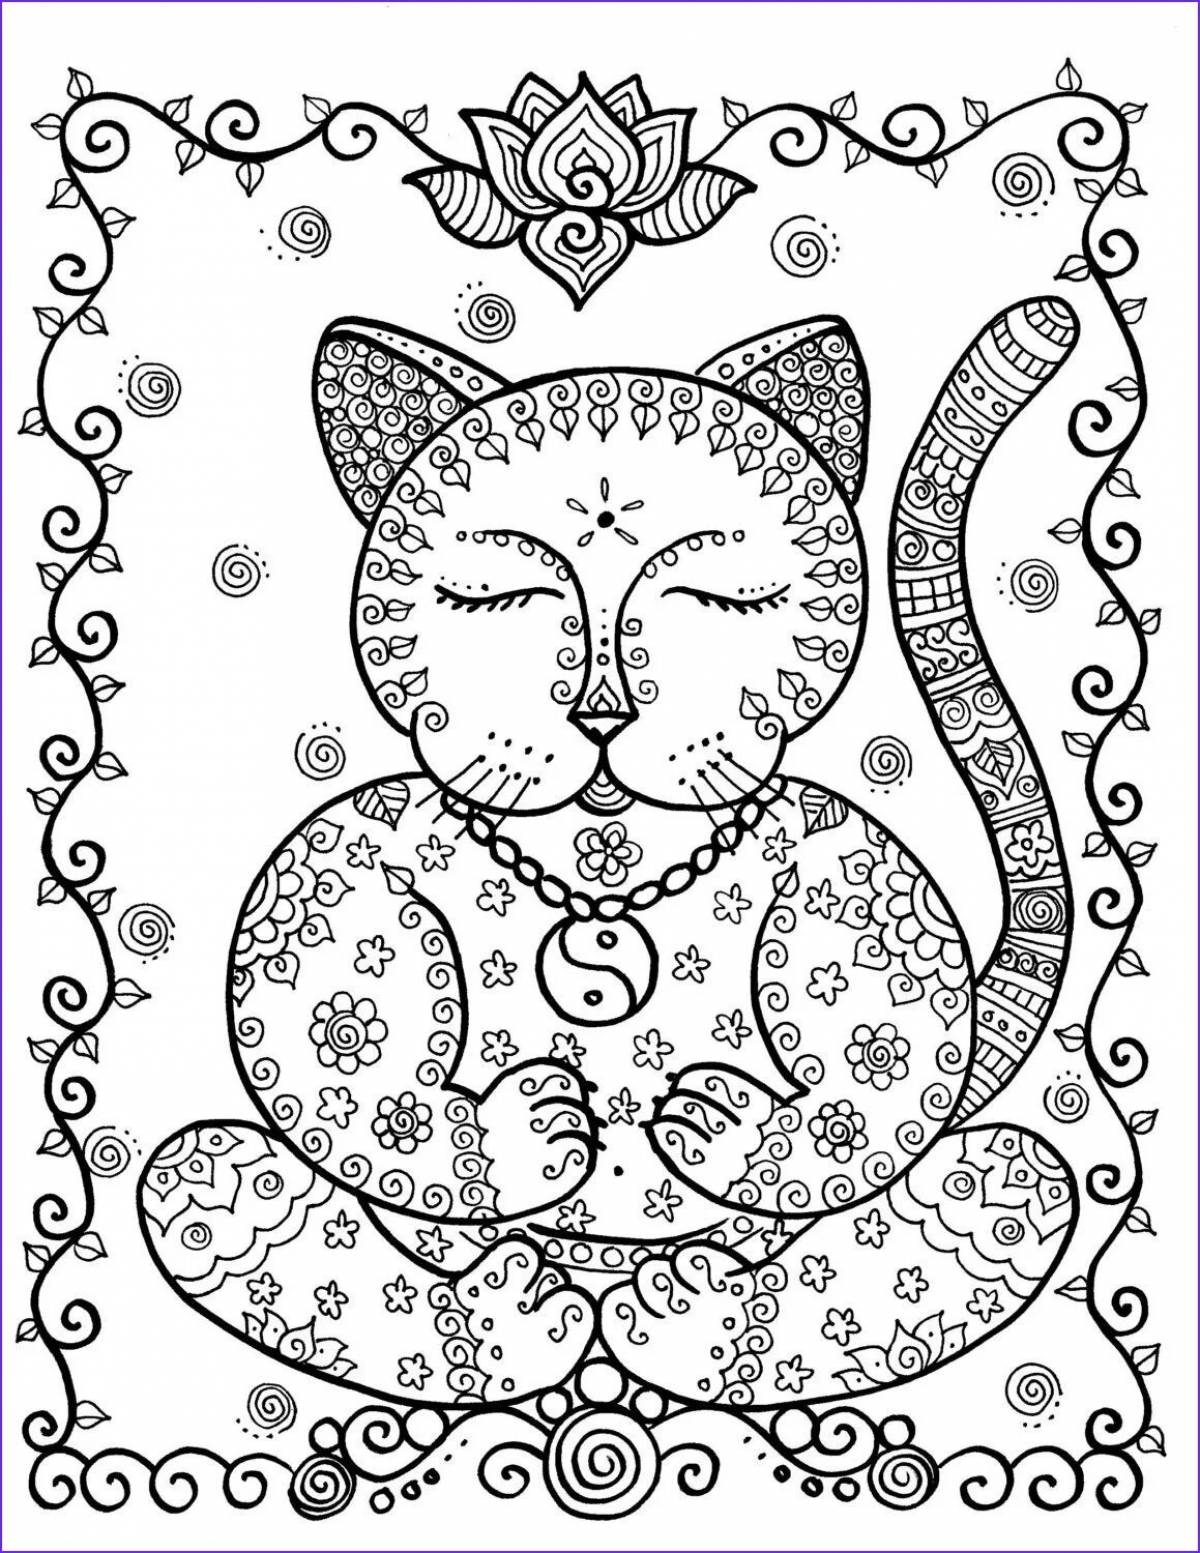 Patterned cat #4